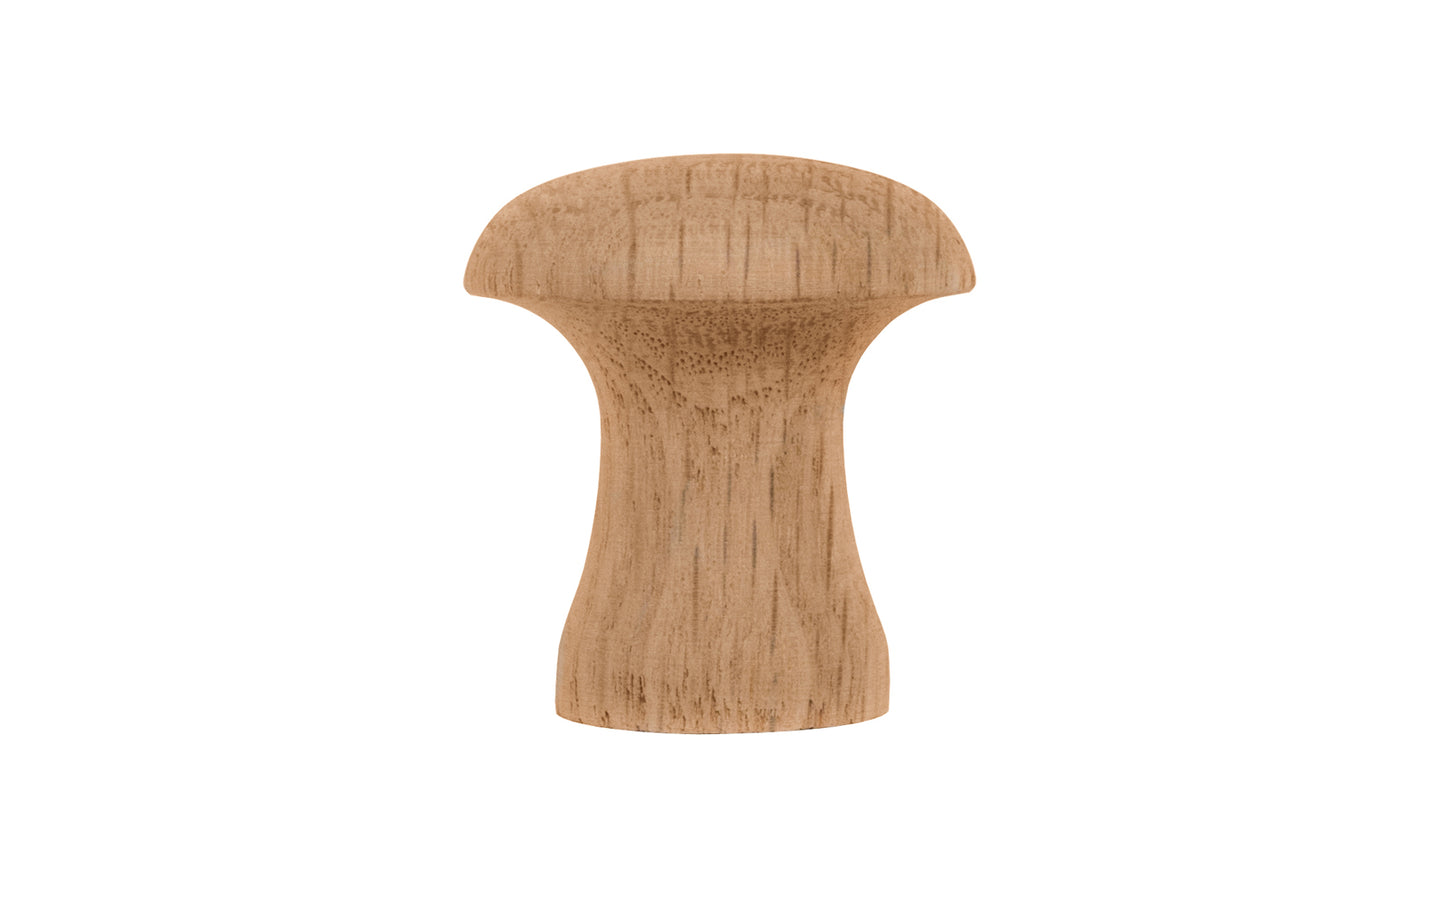 Classic & traditional Shaker-style solid wood cabinet knobs. Oak Wood Knob. These charming wood knobs have a smooth & attractive look & feel. Wooden shaker knob for cabinets, drawers, & furniture. Unfinished mushroom shape wood knob.